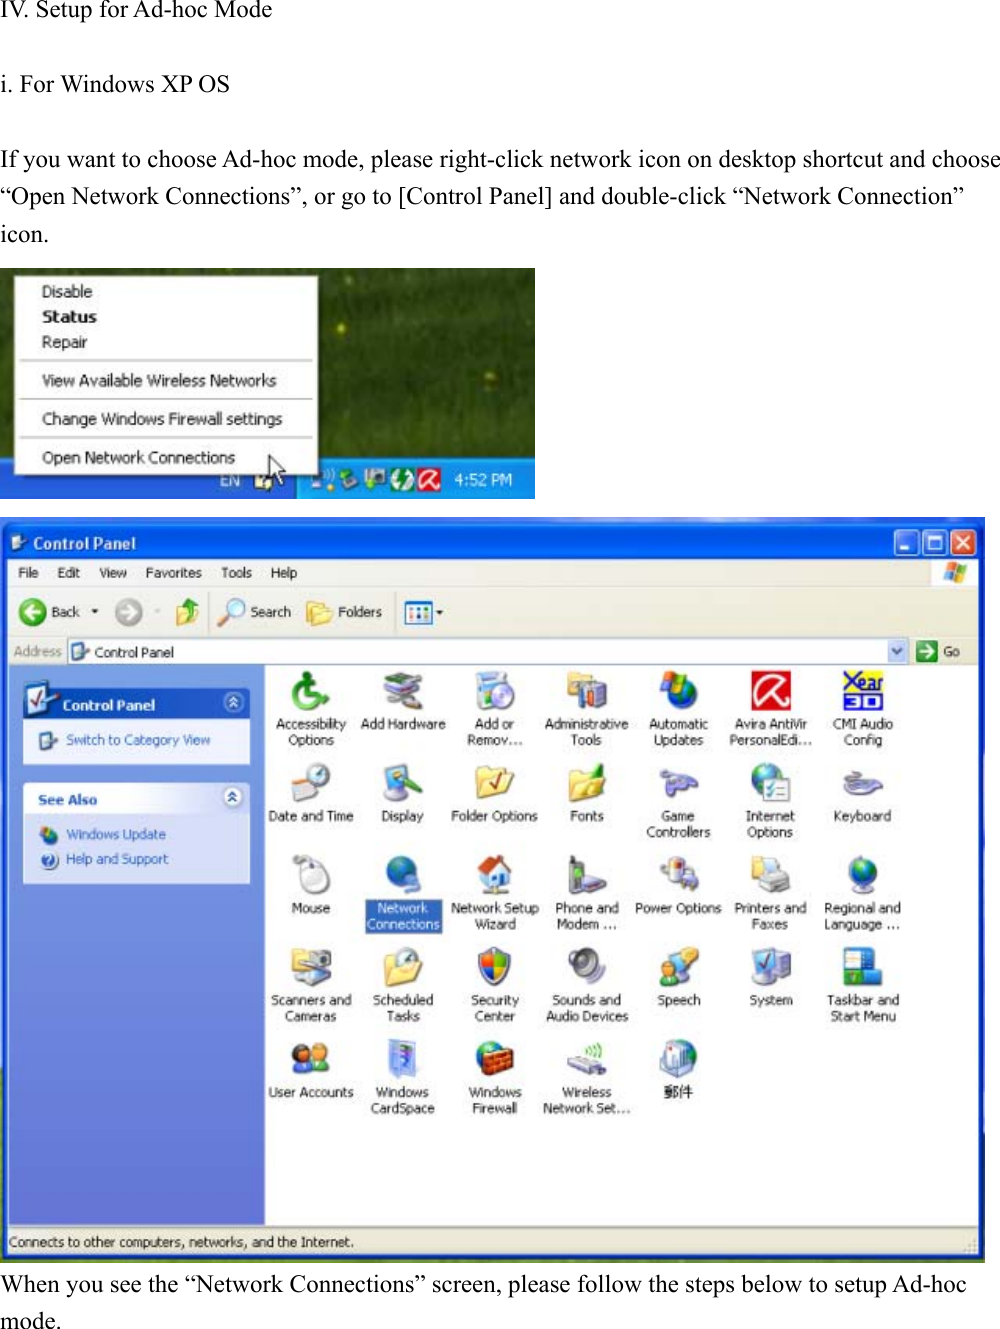 IV. Setup for Ad-hoc Mode  i. For Windows XP OS  If you want to choose Ad-hoc mode, please right-click network icon on desktop shortcut and choose “Open Network Connections”, or go to [Control Panel] and double-click “Network Connection” icon.    When you see the “Network Connections” screen, please follow the steps below to setup Ad-hoc mode.       